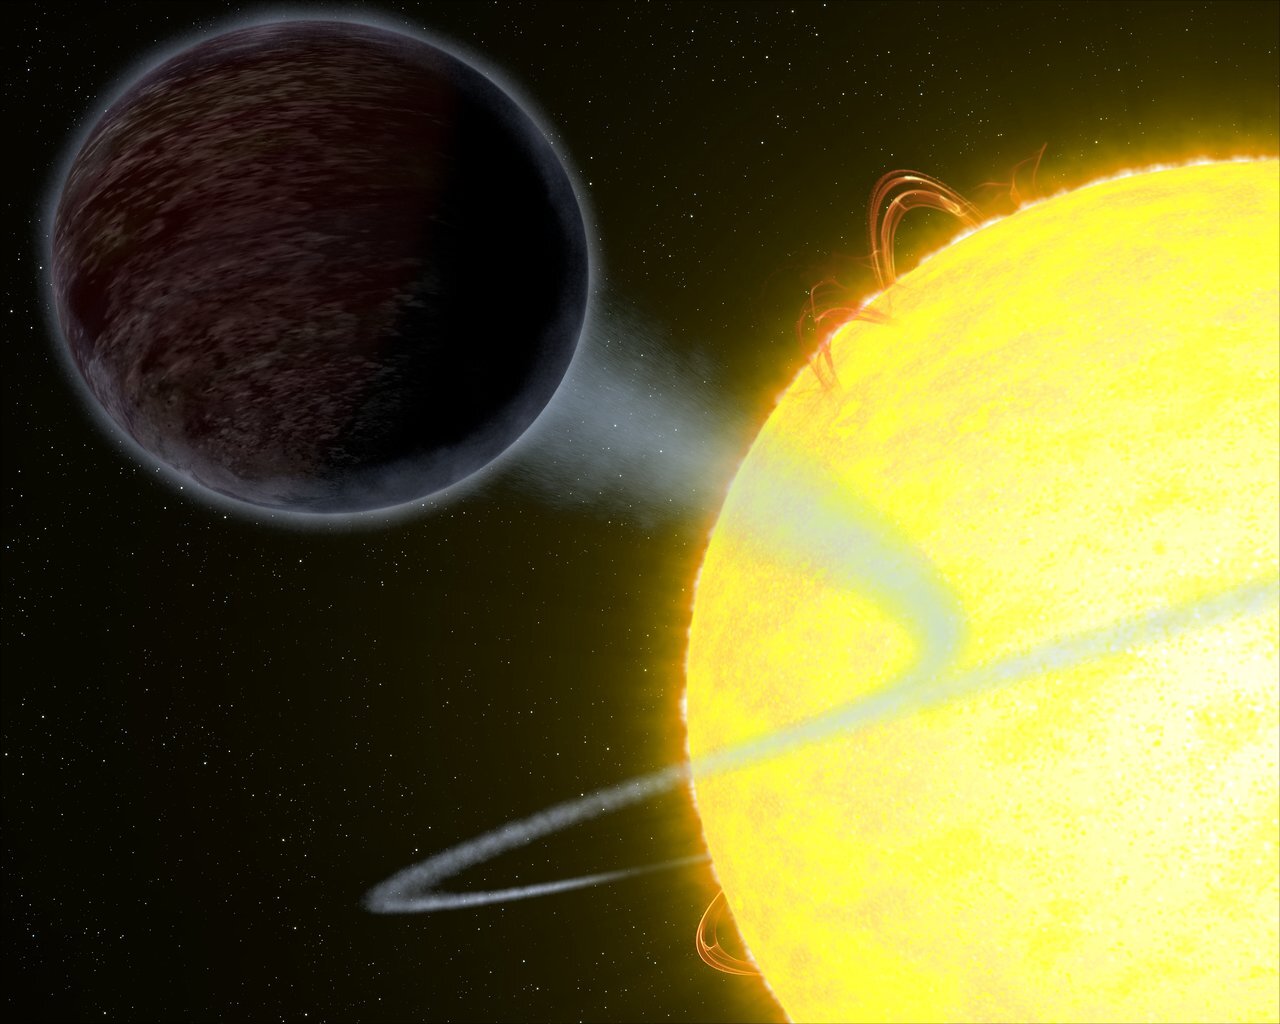 This illustration shows one of the darkest known exoplanets — an alien world as black as fresh asphalt.